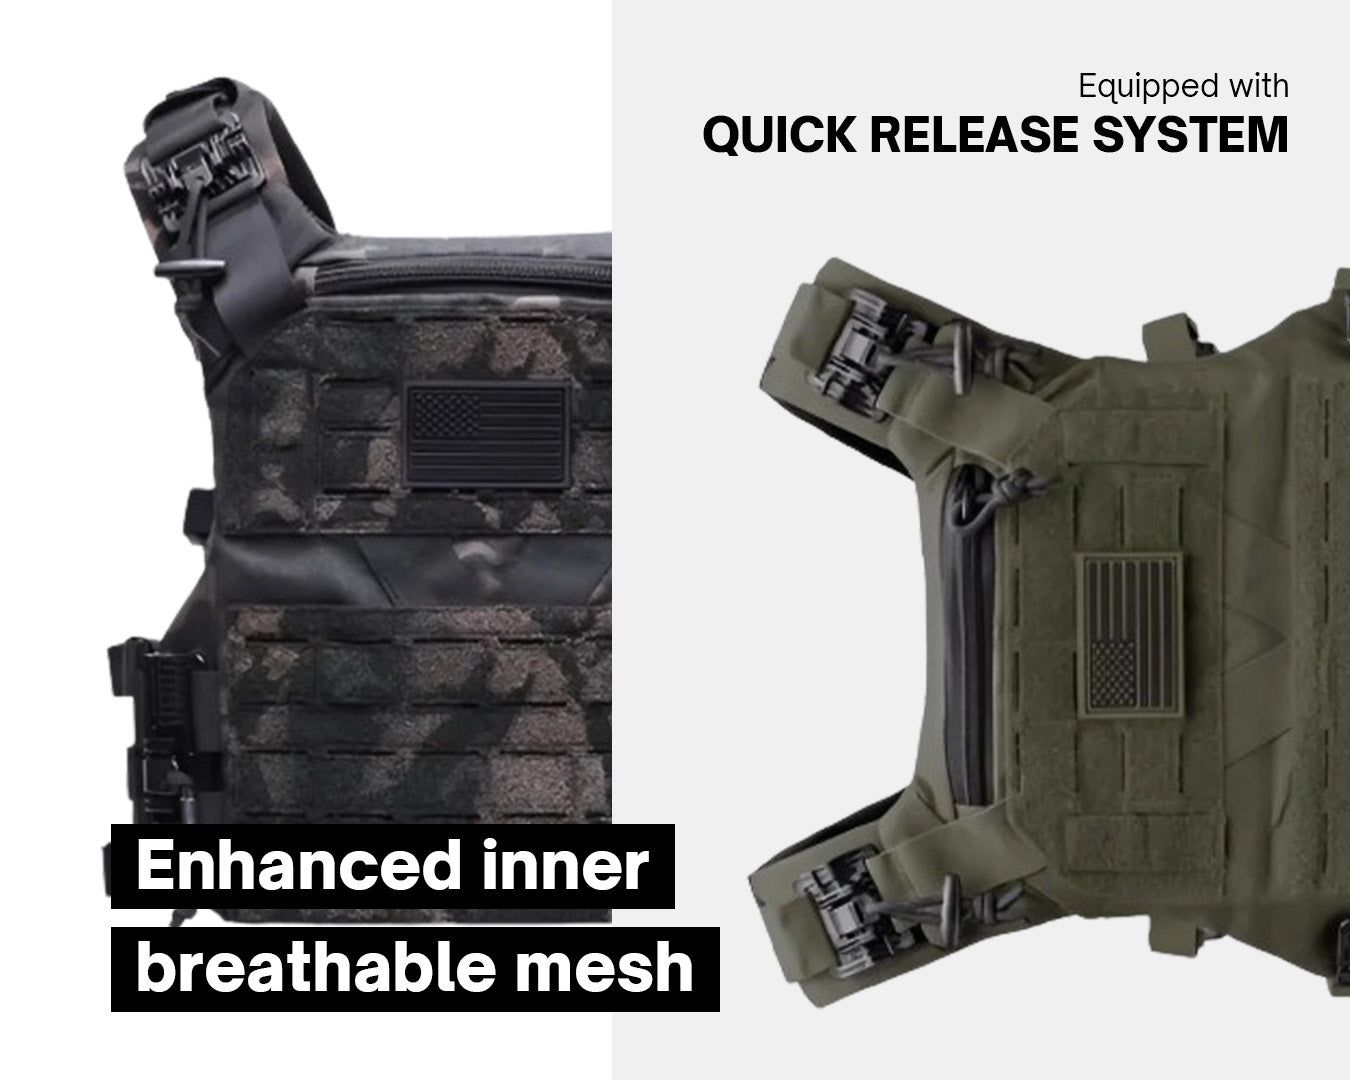 Tacticon Armament Battlevest Elite Plate Carrier equipped with quick release system